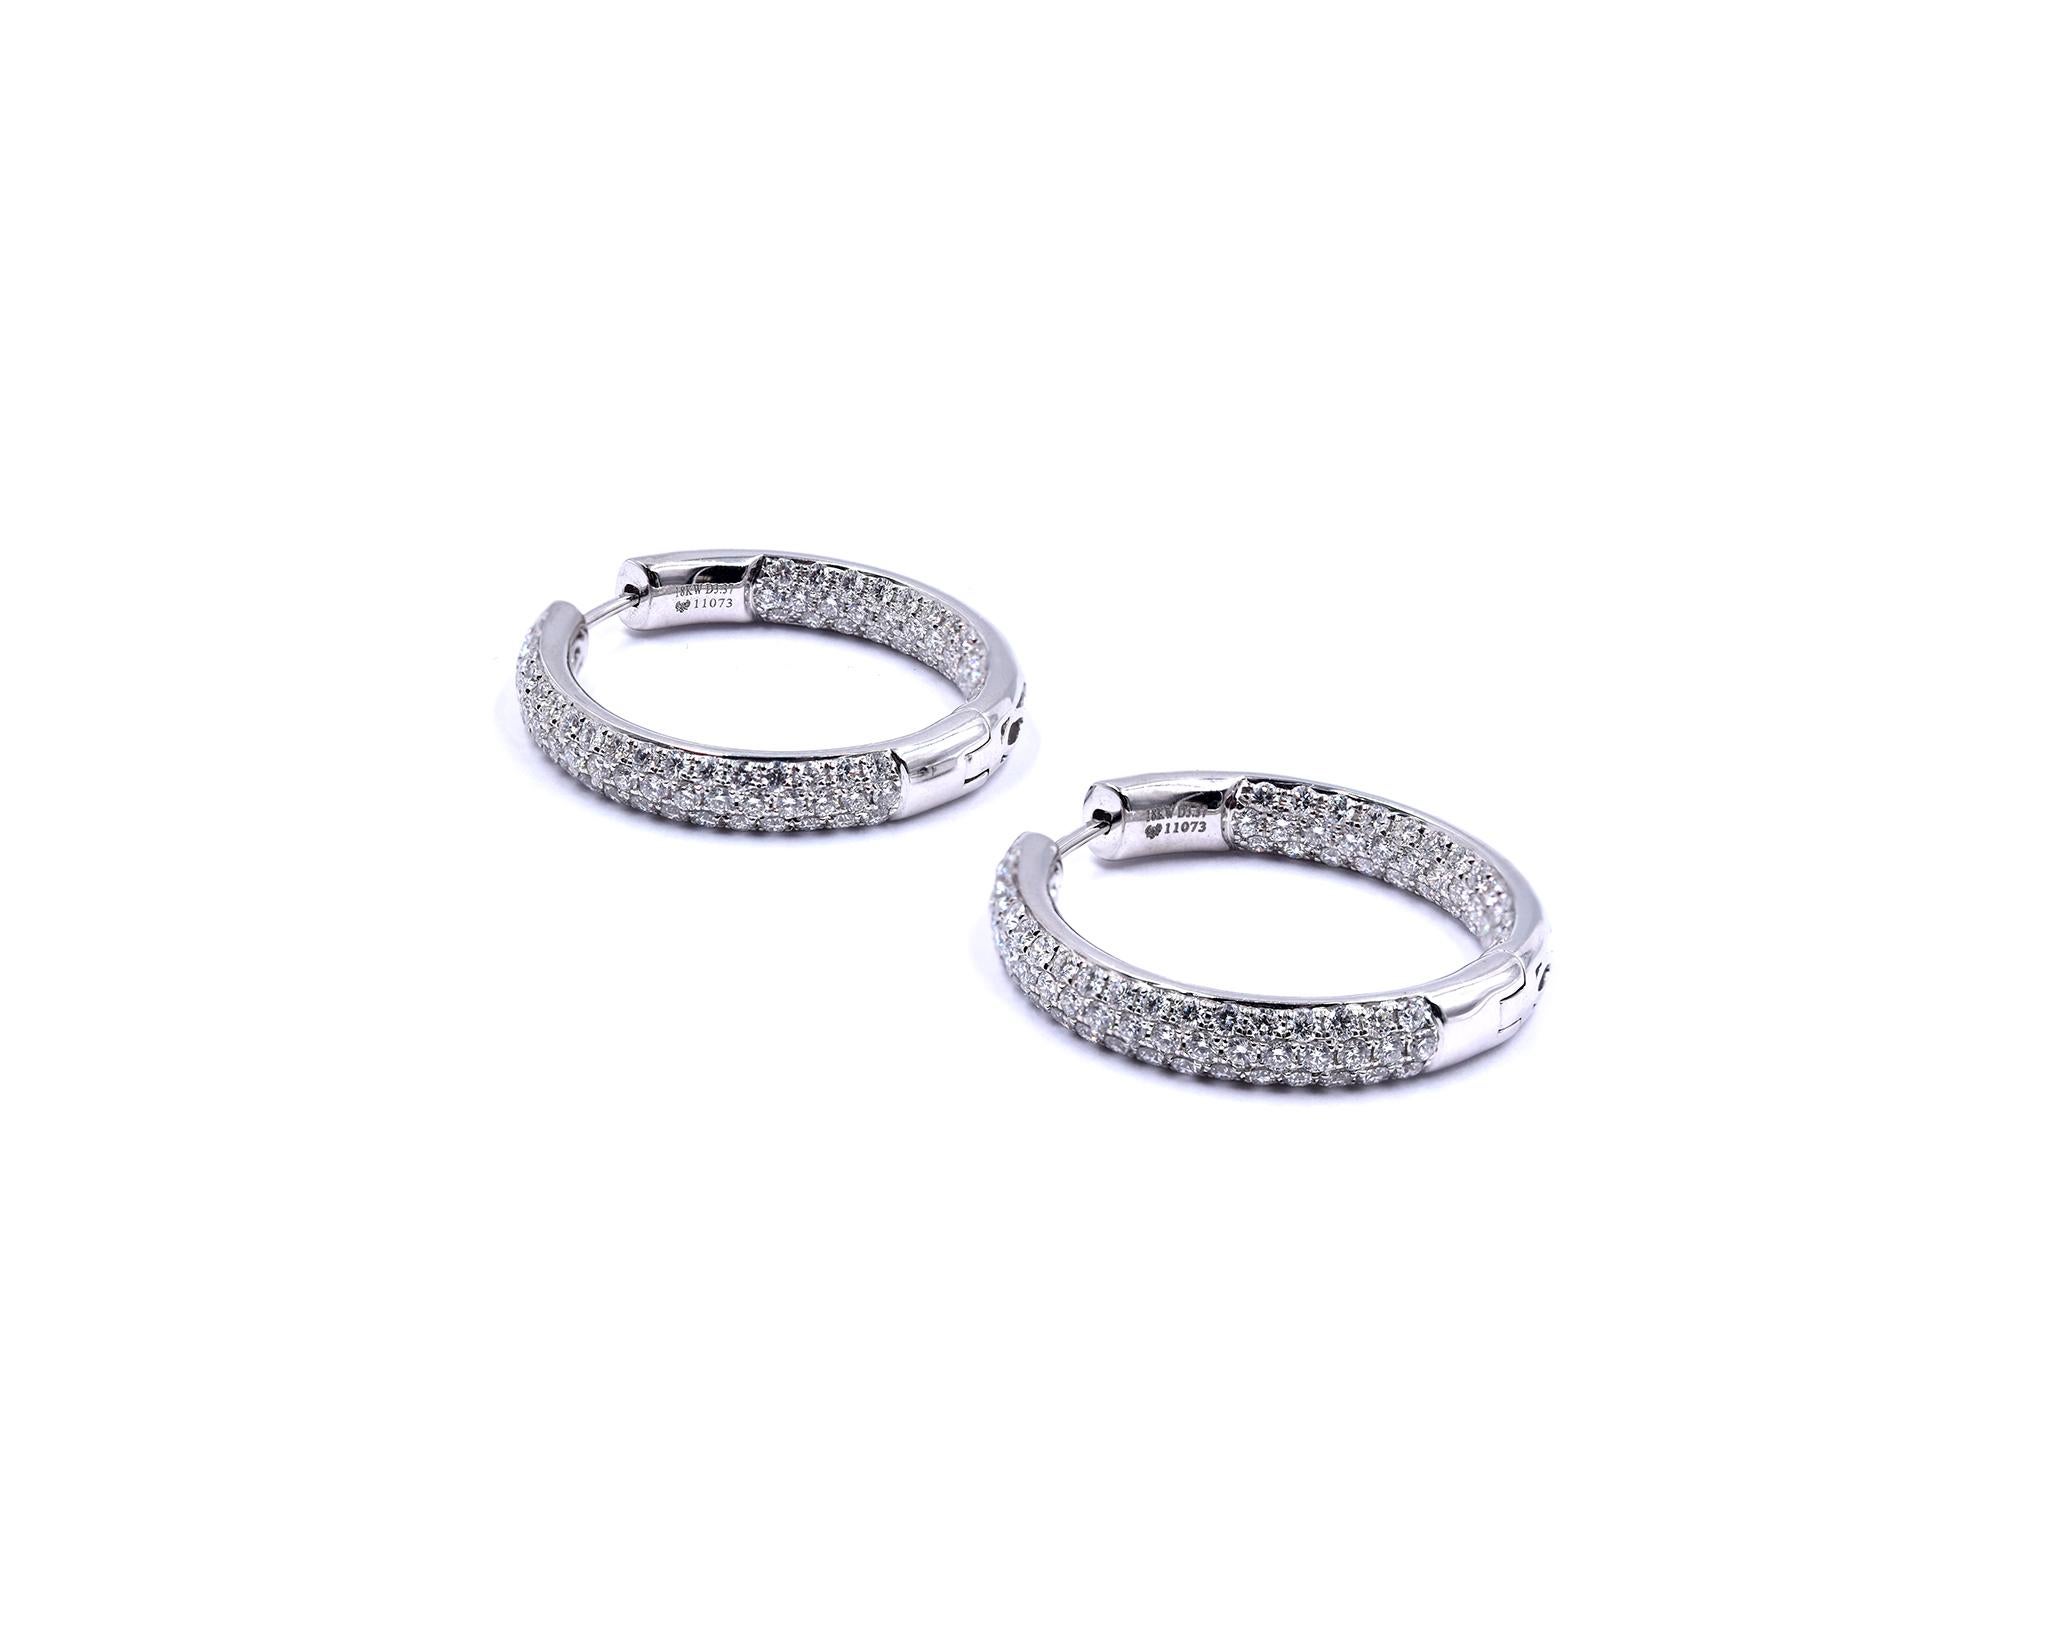 Material: 14K white gold
Diamonds: 178 round cut = 2.67cttw
Color:  G
Clarity: VS
Dimensions: earrings measure 30mm
Weight: 14.21 grams
